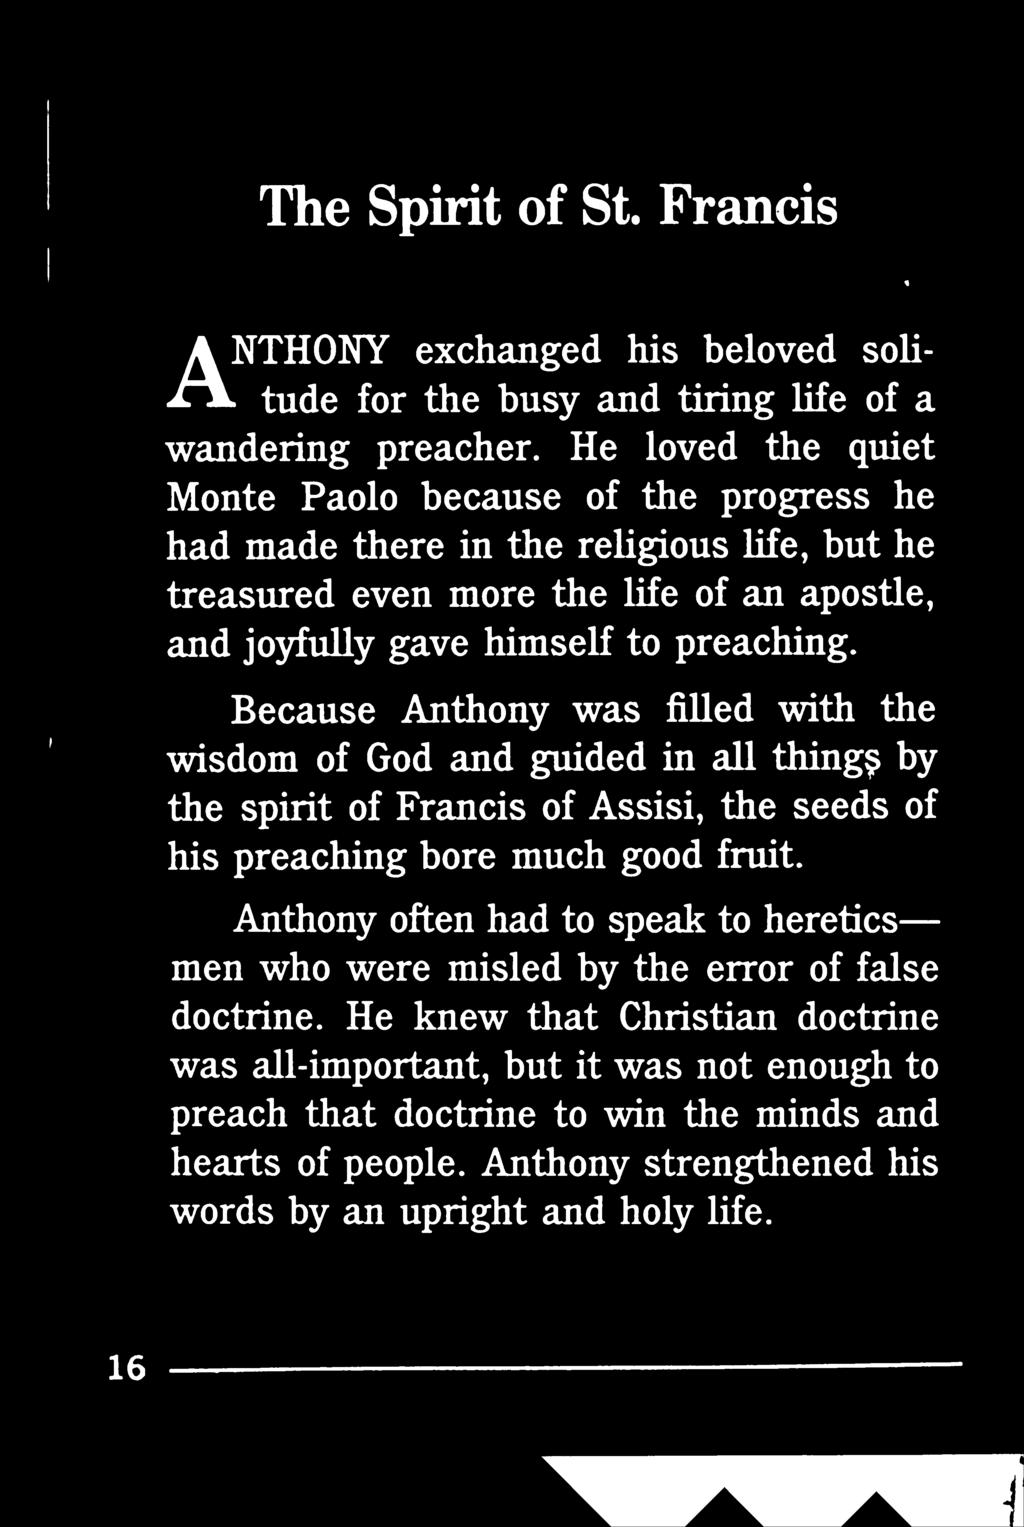 of an apostle, Because Anthony was filled with the wisdom of God and guided in all things by the spirit of Francis of Assisi, the seeds of his preaching bore much good fruit.